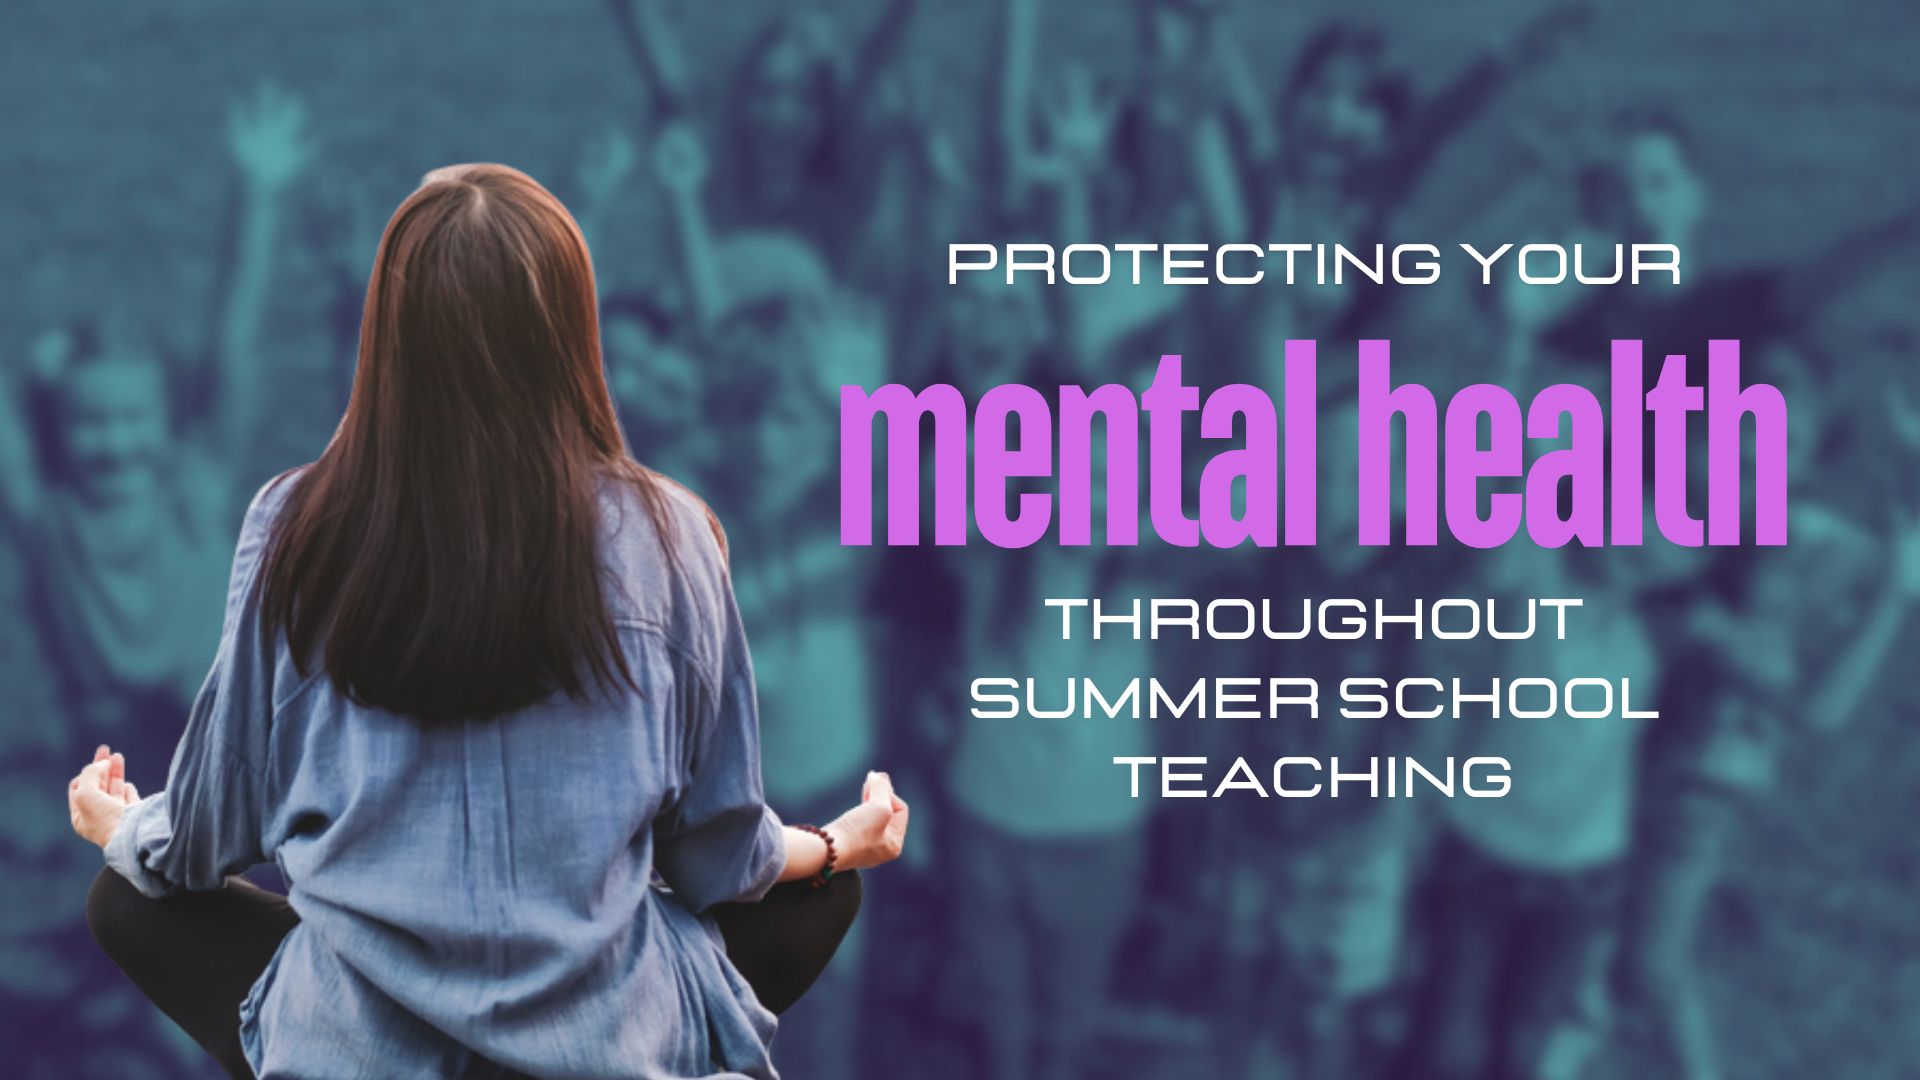 Protecting your mental health throughout Summer School Teaching 